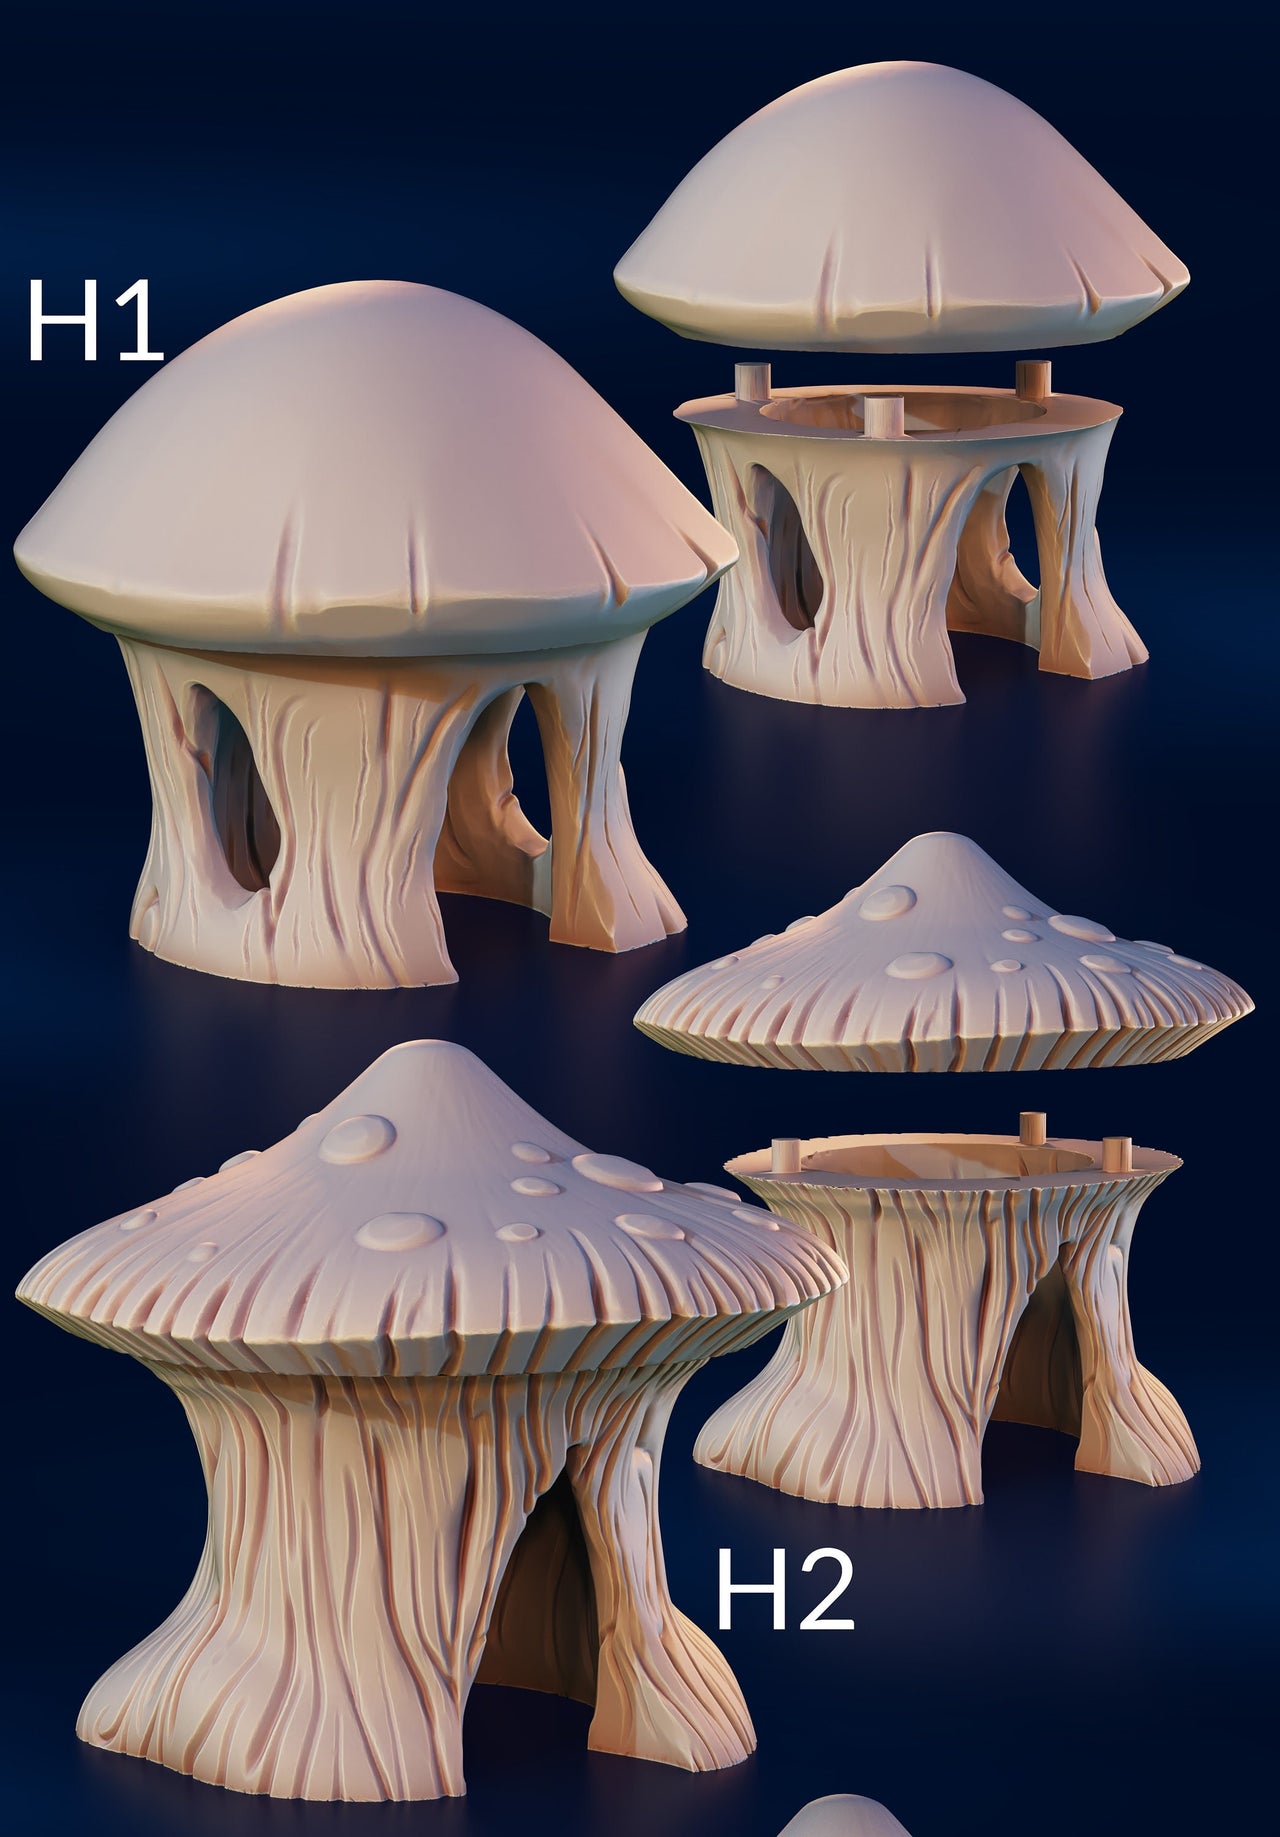 Giant Mushroom House - Fungal Tunnels by 3DHexes | Big Fungus Terrain for Roleplaying and Gaming | Shroom